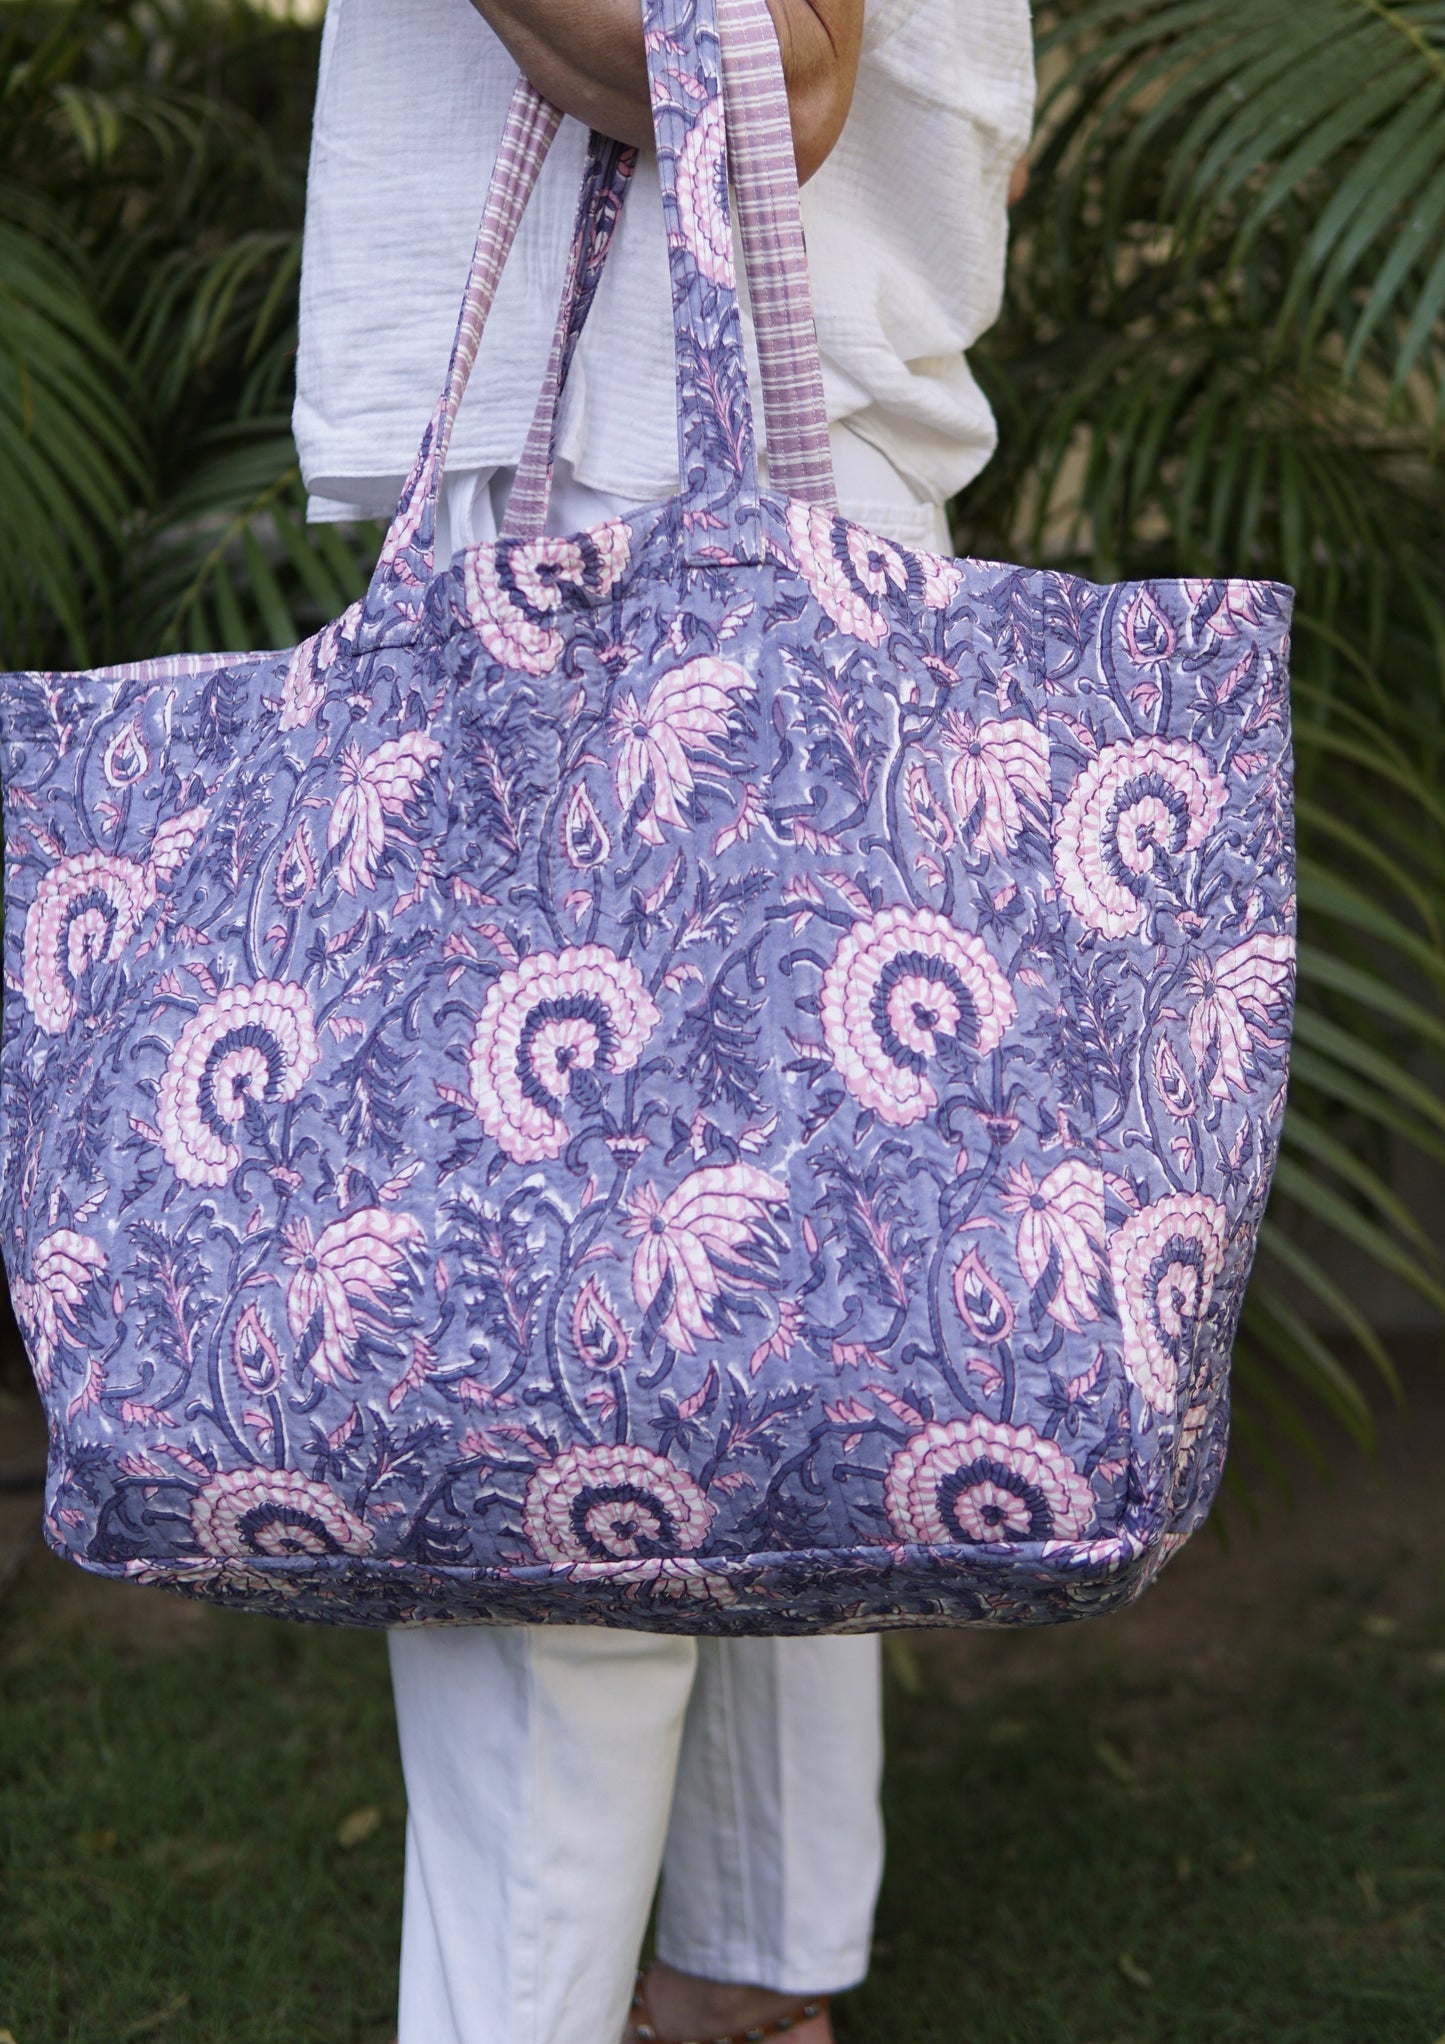 lilac, pink and white beach bag blue and white beach bag fold beachbag squashable beach bag XL beach bag tote bag summer bag quilted cotton bag Nappy bag Large tote bag block print cotton tote bag block print cotton bag , yoga bag, XL nappy bag beach bag